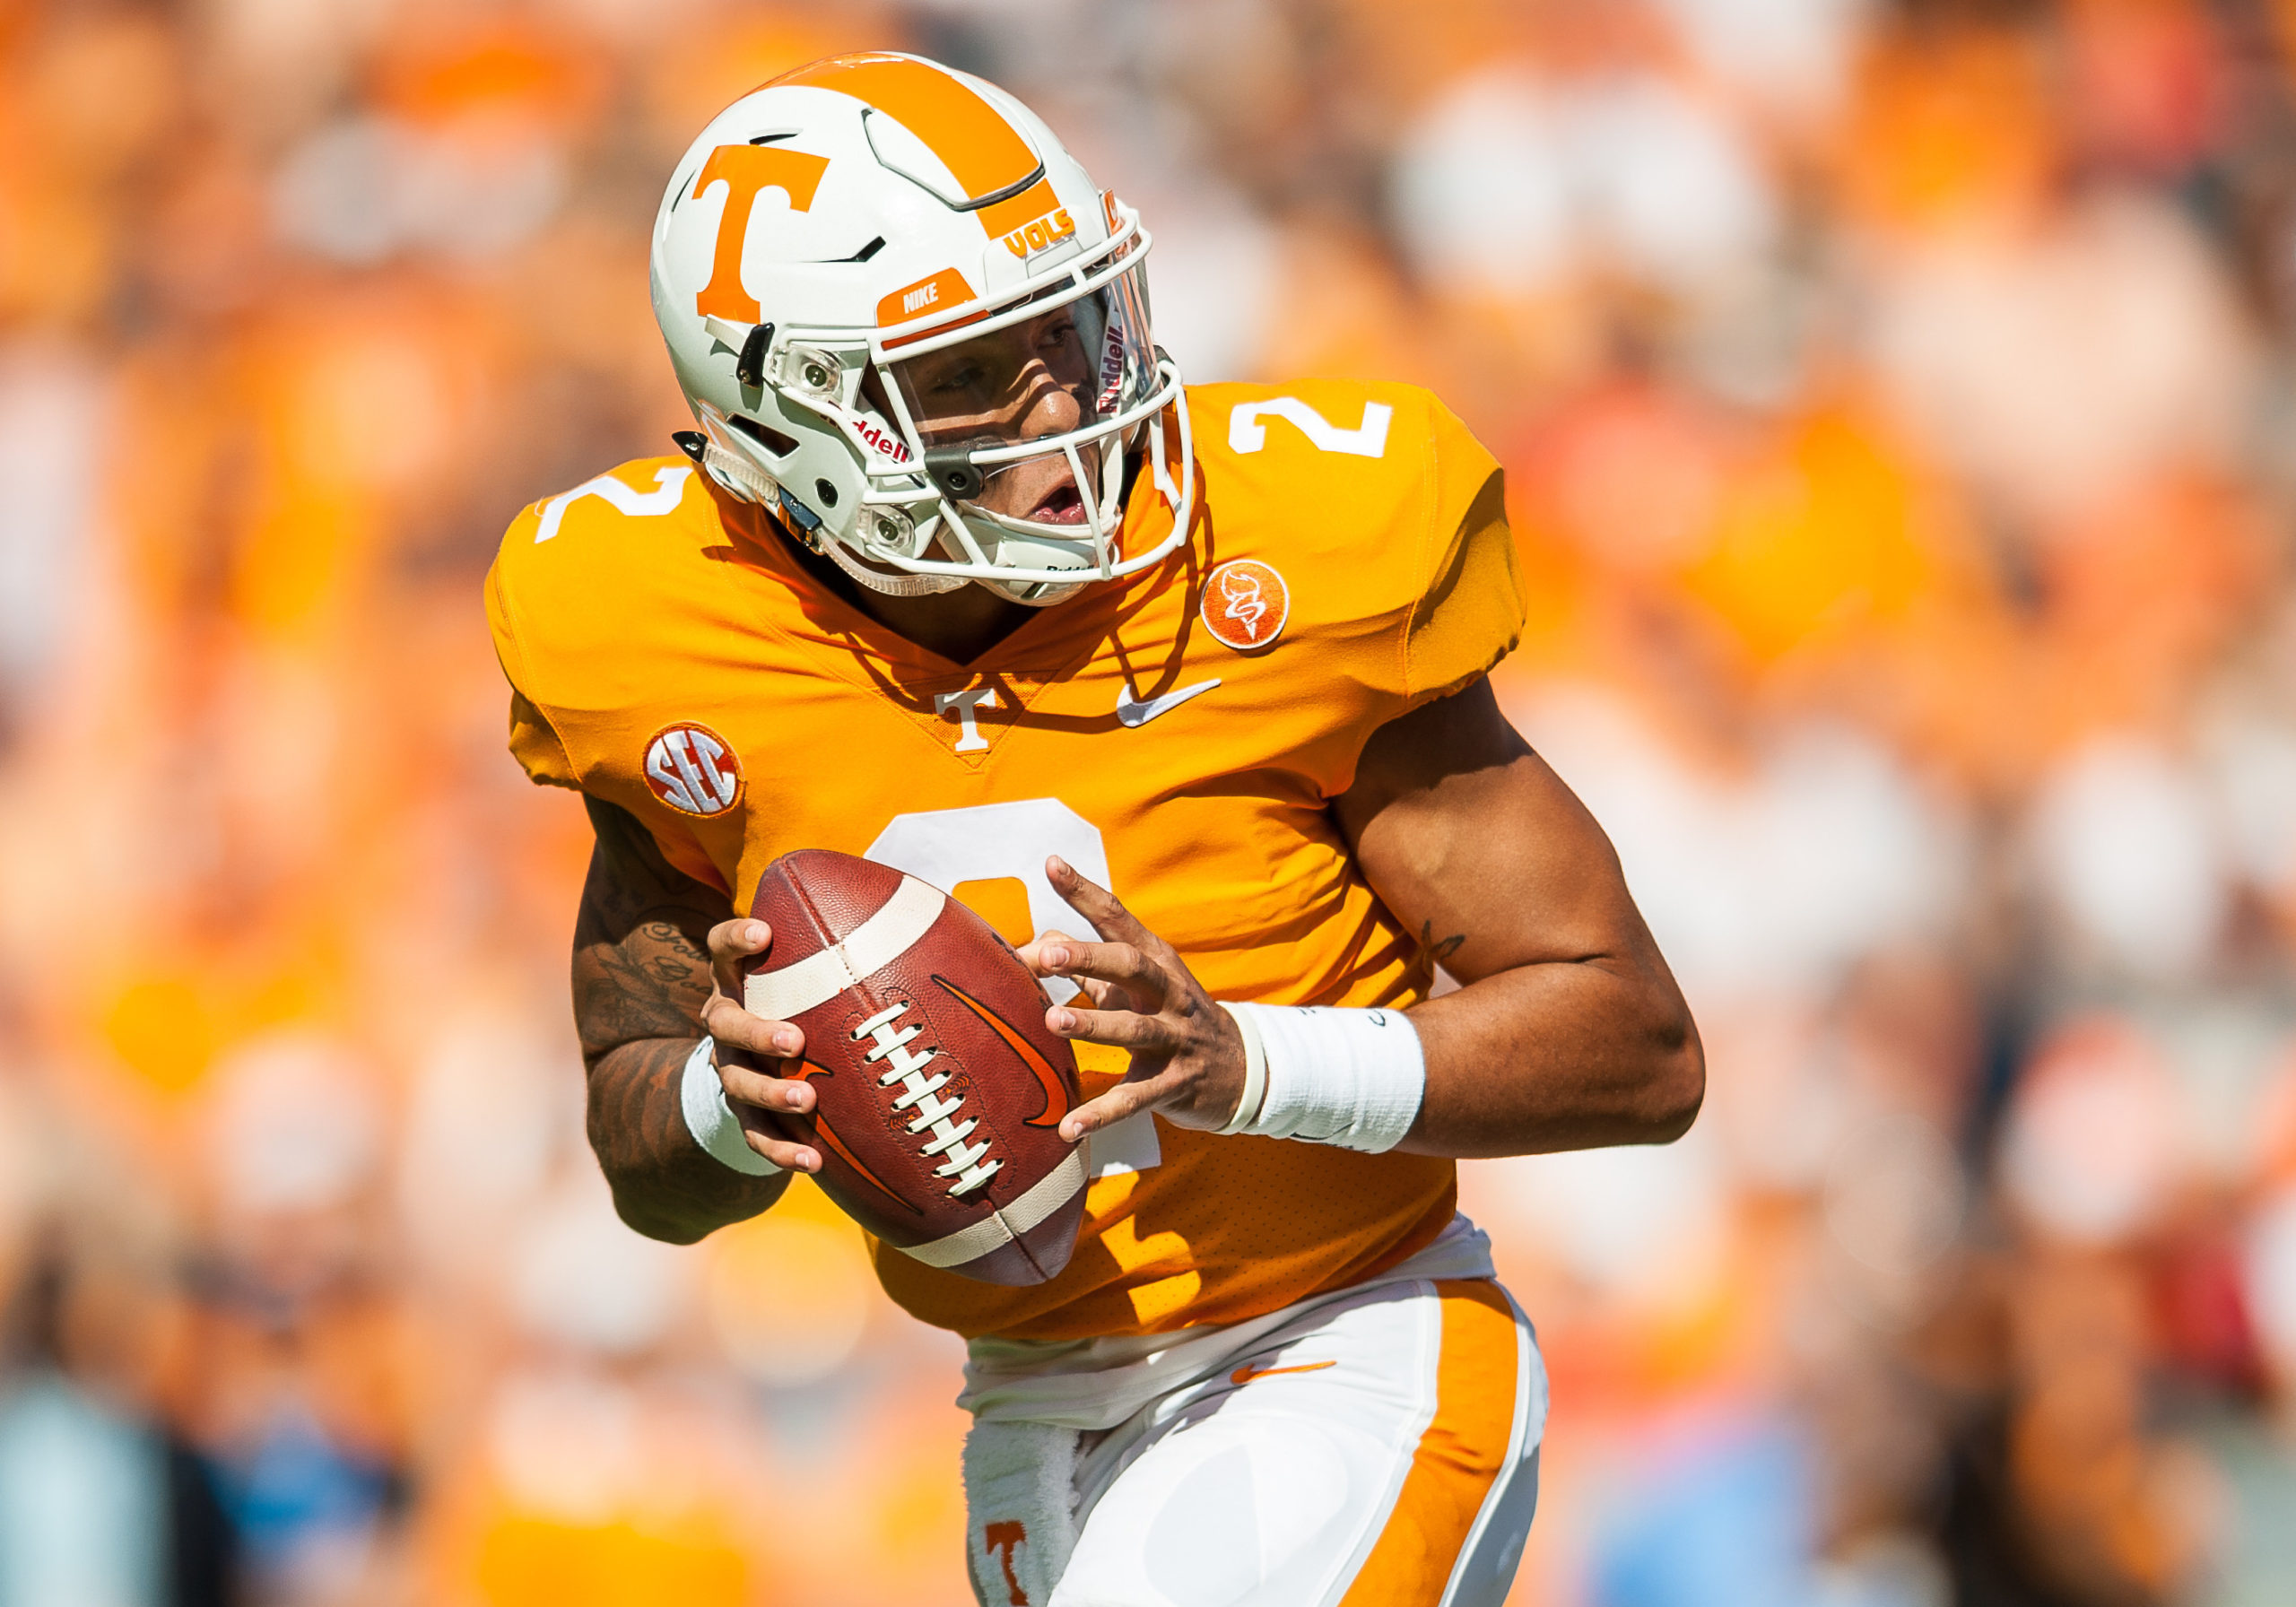 KNOXVILLE, TN - SEPTEMBER 09: Tennessee Volunteers quarterback Jarrett Guarantano (2) looking to pass during a game between the Indiana State Sycamores and Tennessee Volunteers on September 9, 2017, at Neyland Stadium in Knoxville, TN. (Photo by Bryan Lynn/Icon Sportswire via Getty Images)